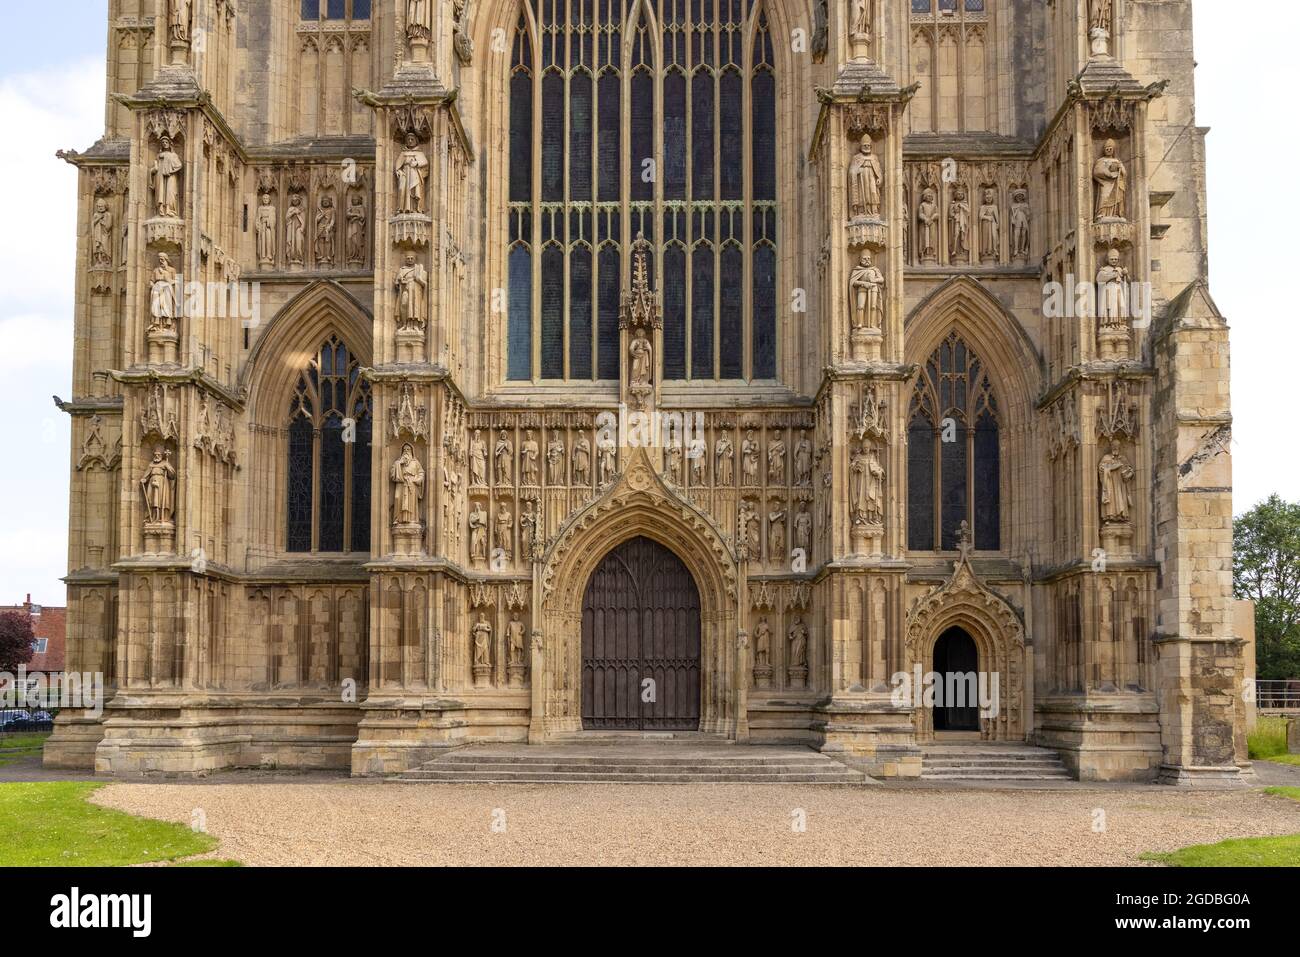 Beverley Minster, Yorkshire UK, the 11th century gothic parish church in Beverley, seen from the exterior West doors with 18th century carvings, Stock Photo